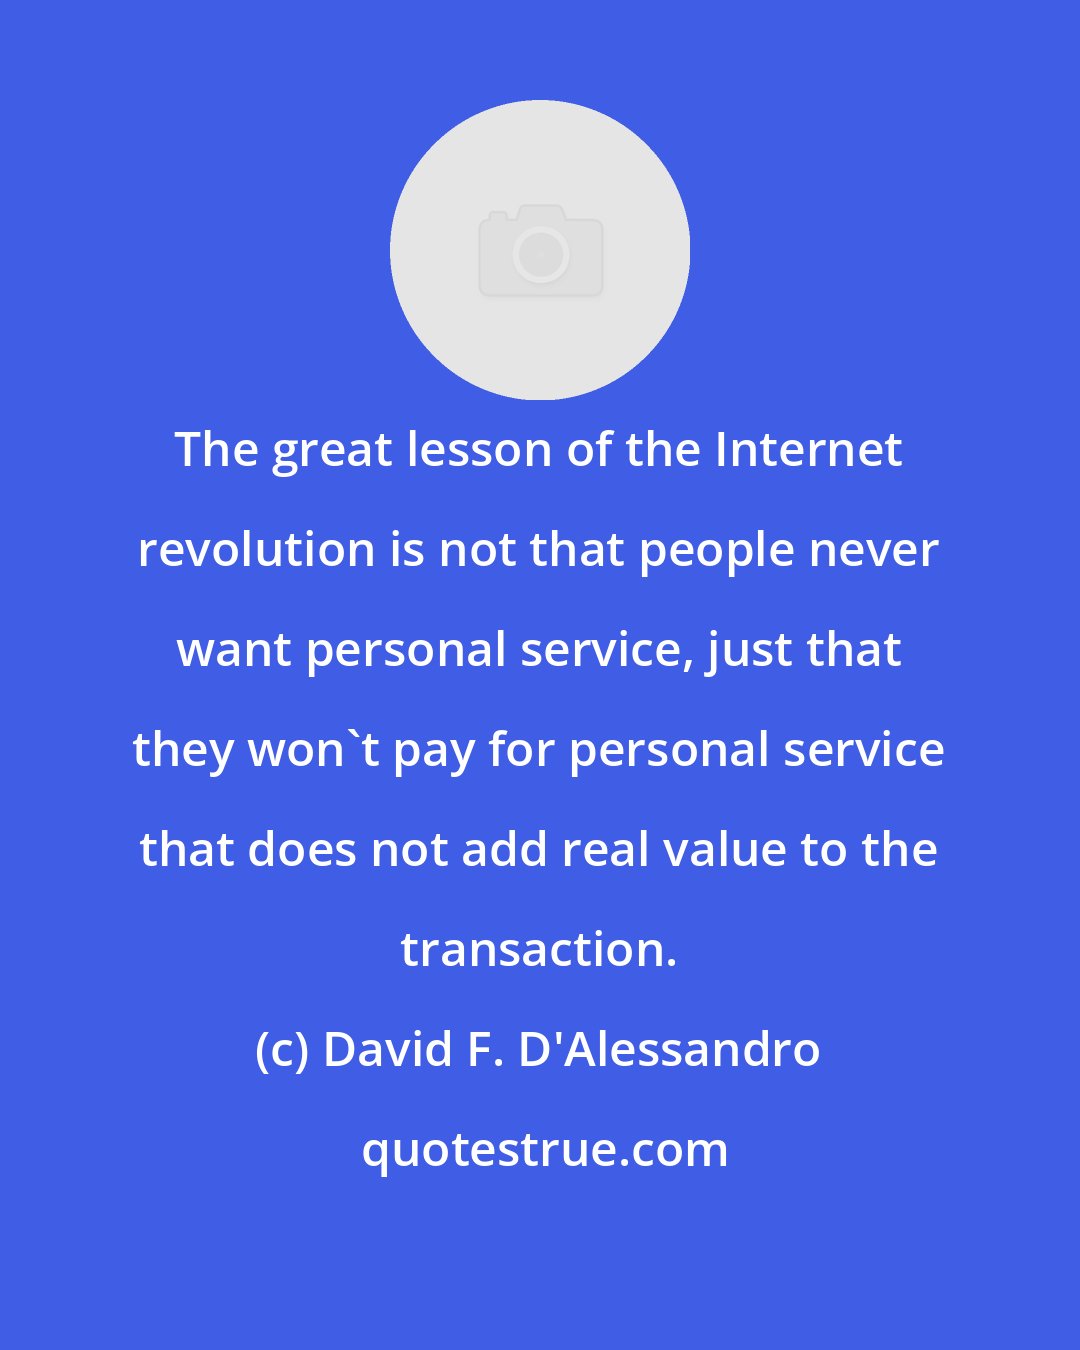 David F. D'Alessandro: The great lesson of the Internet revolution is not that people never want personal service, just that they won't pay for personal service that does not add real value to the transaction.